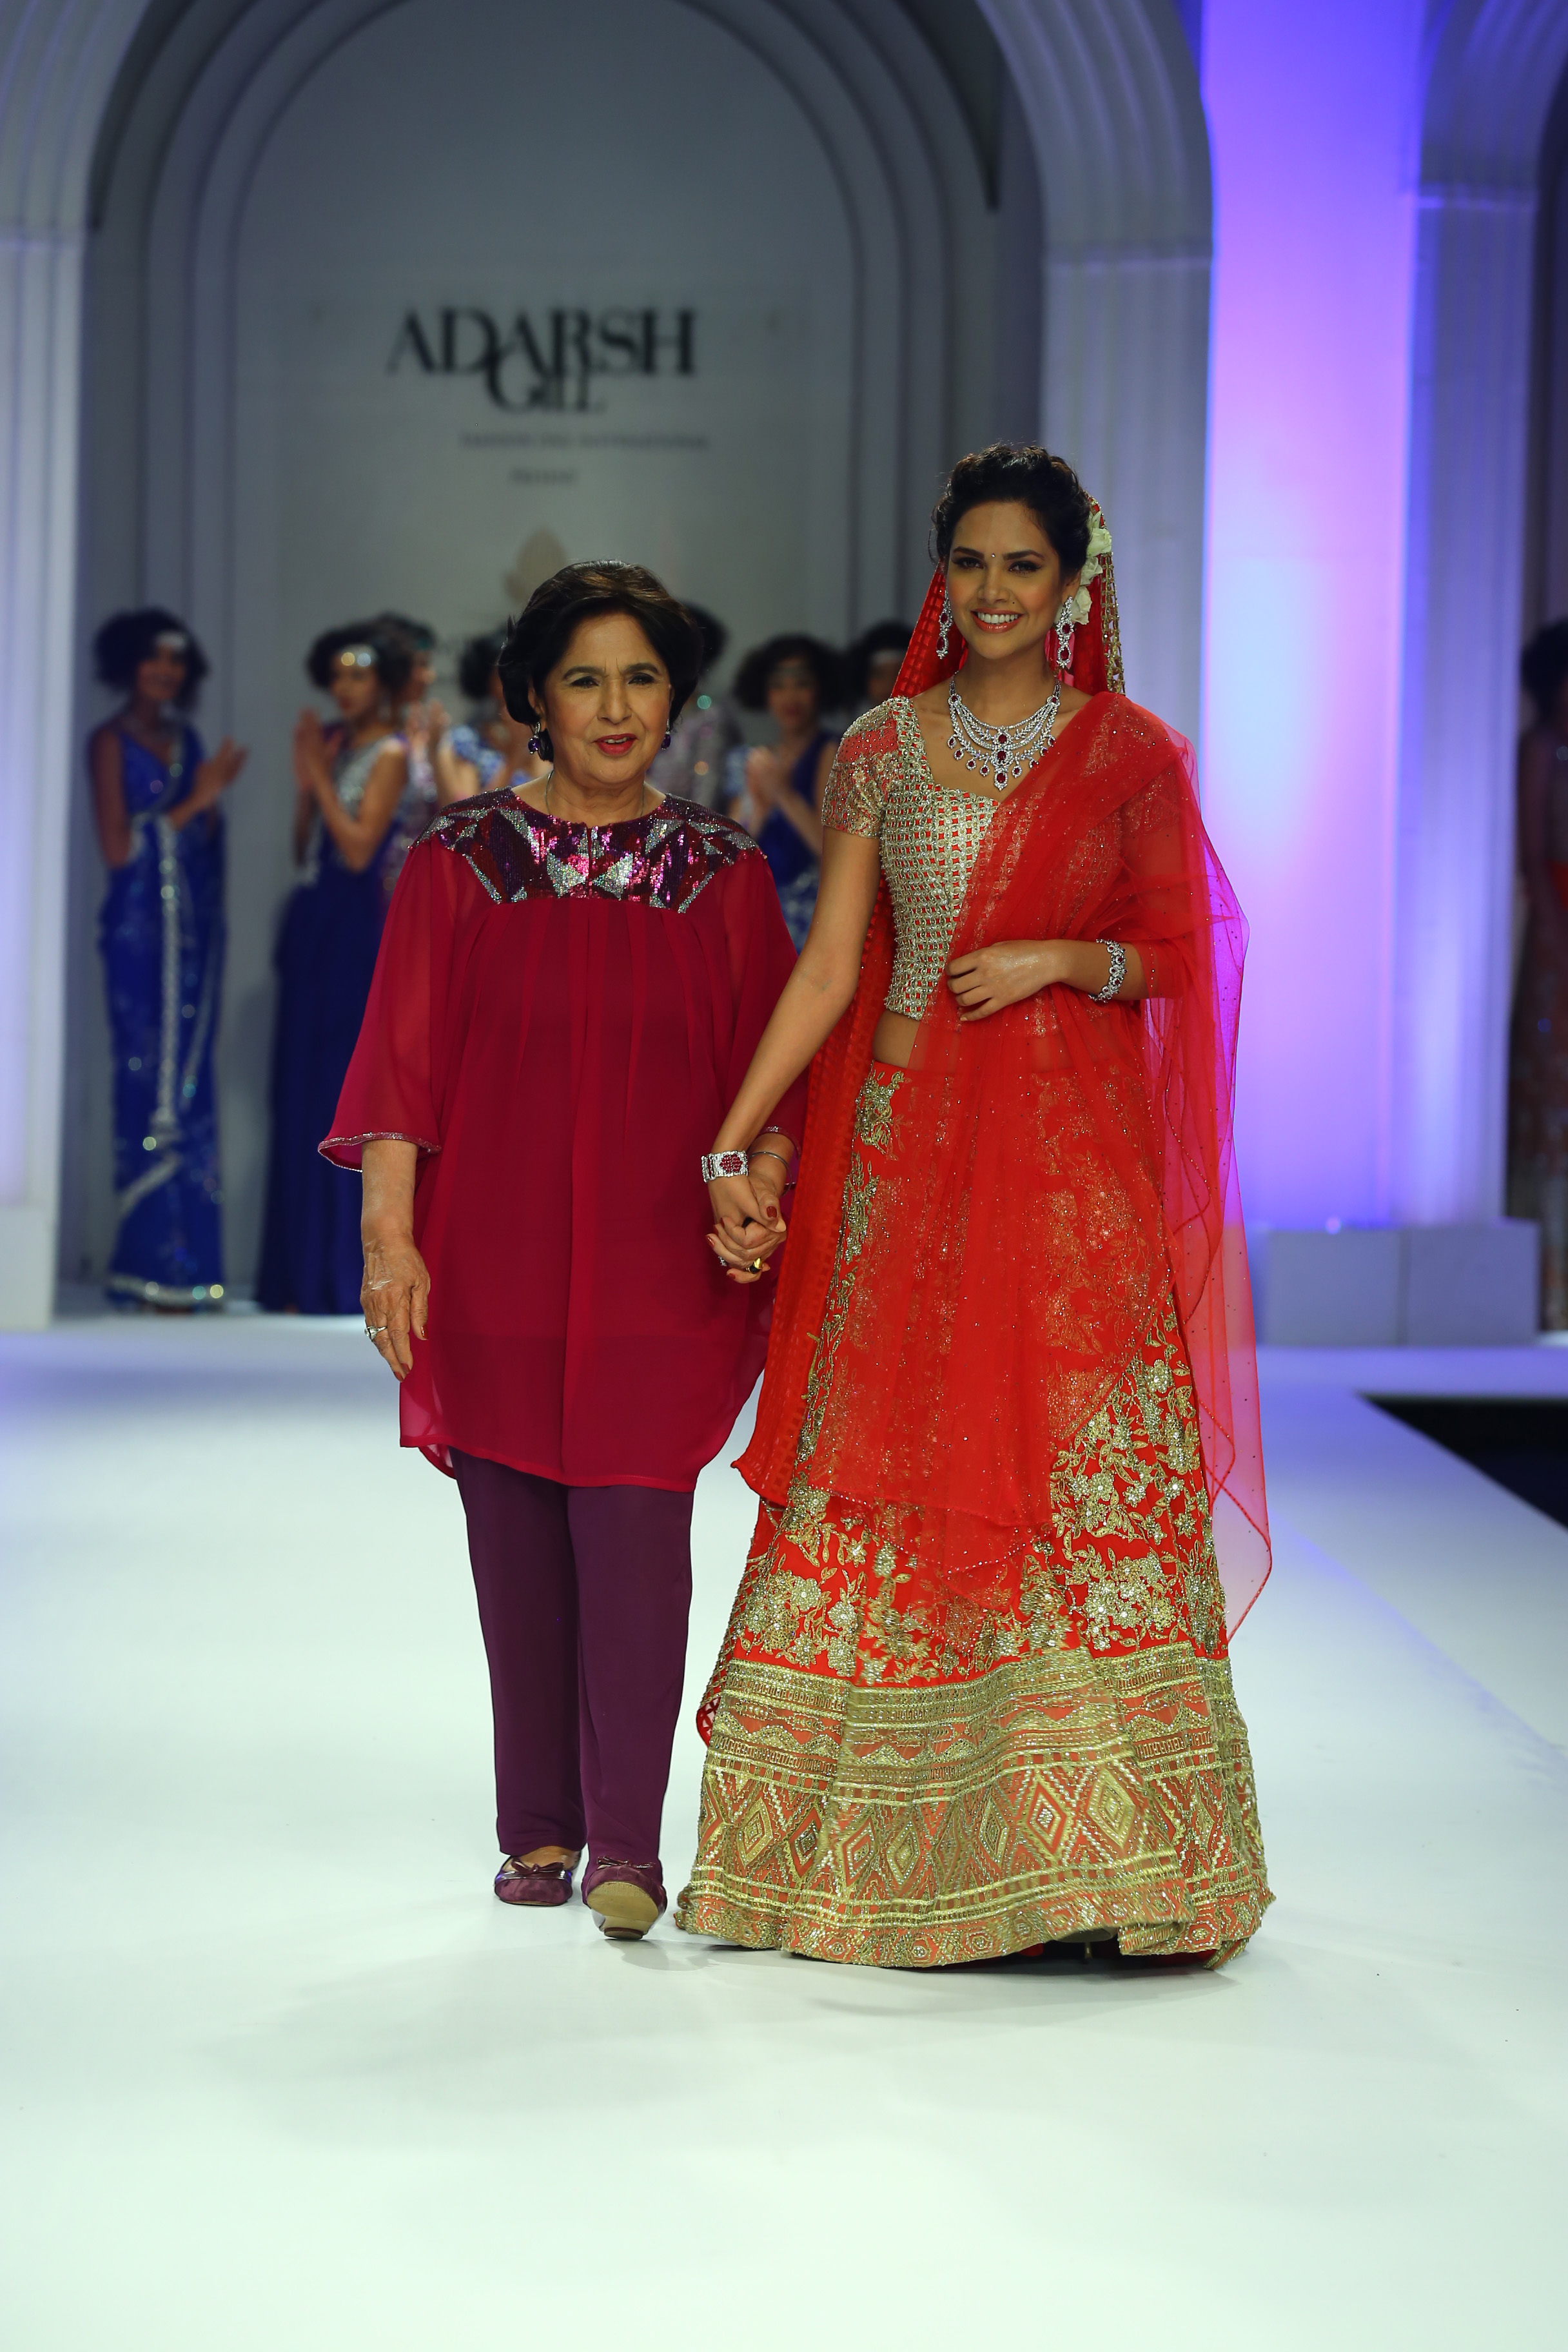 Esha Gupta as the showstopper for Adarsh Gill's Collection